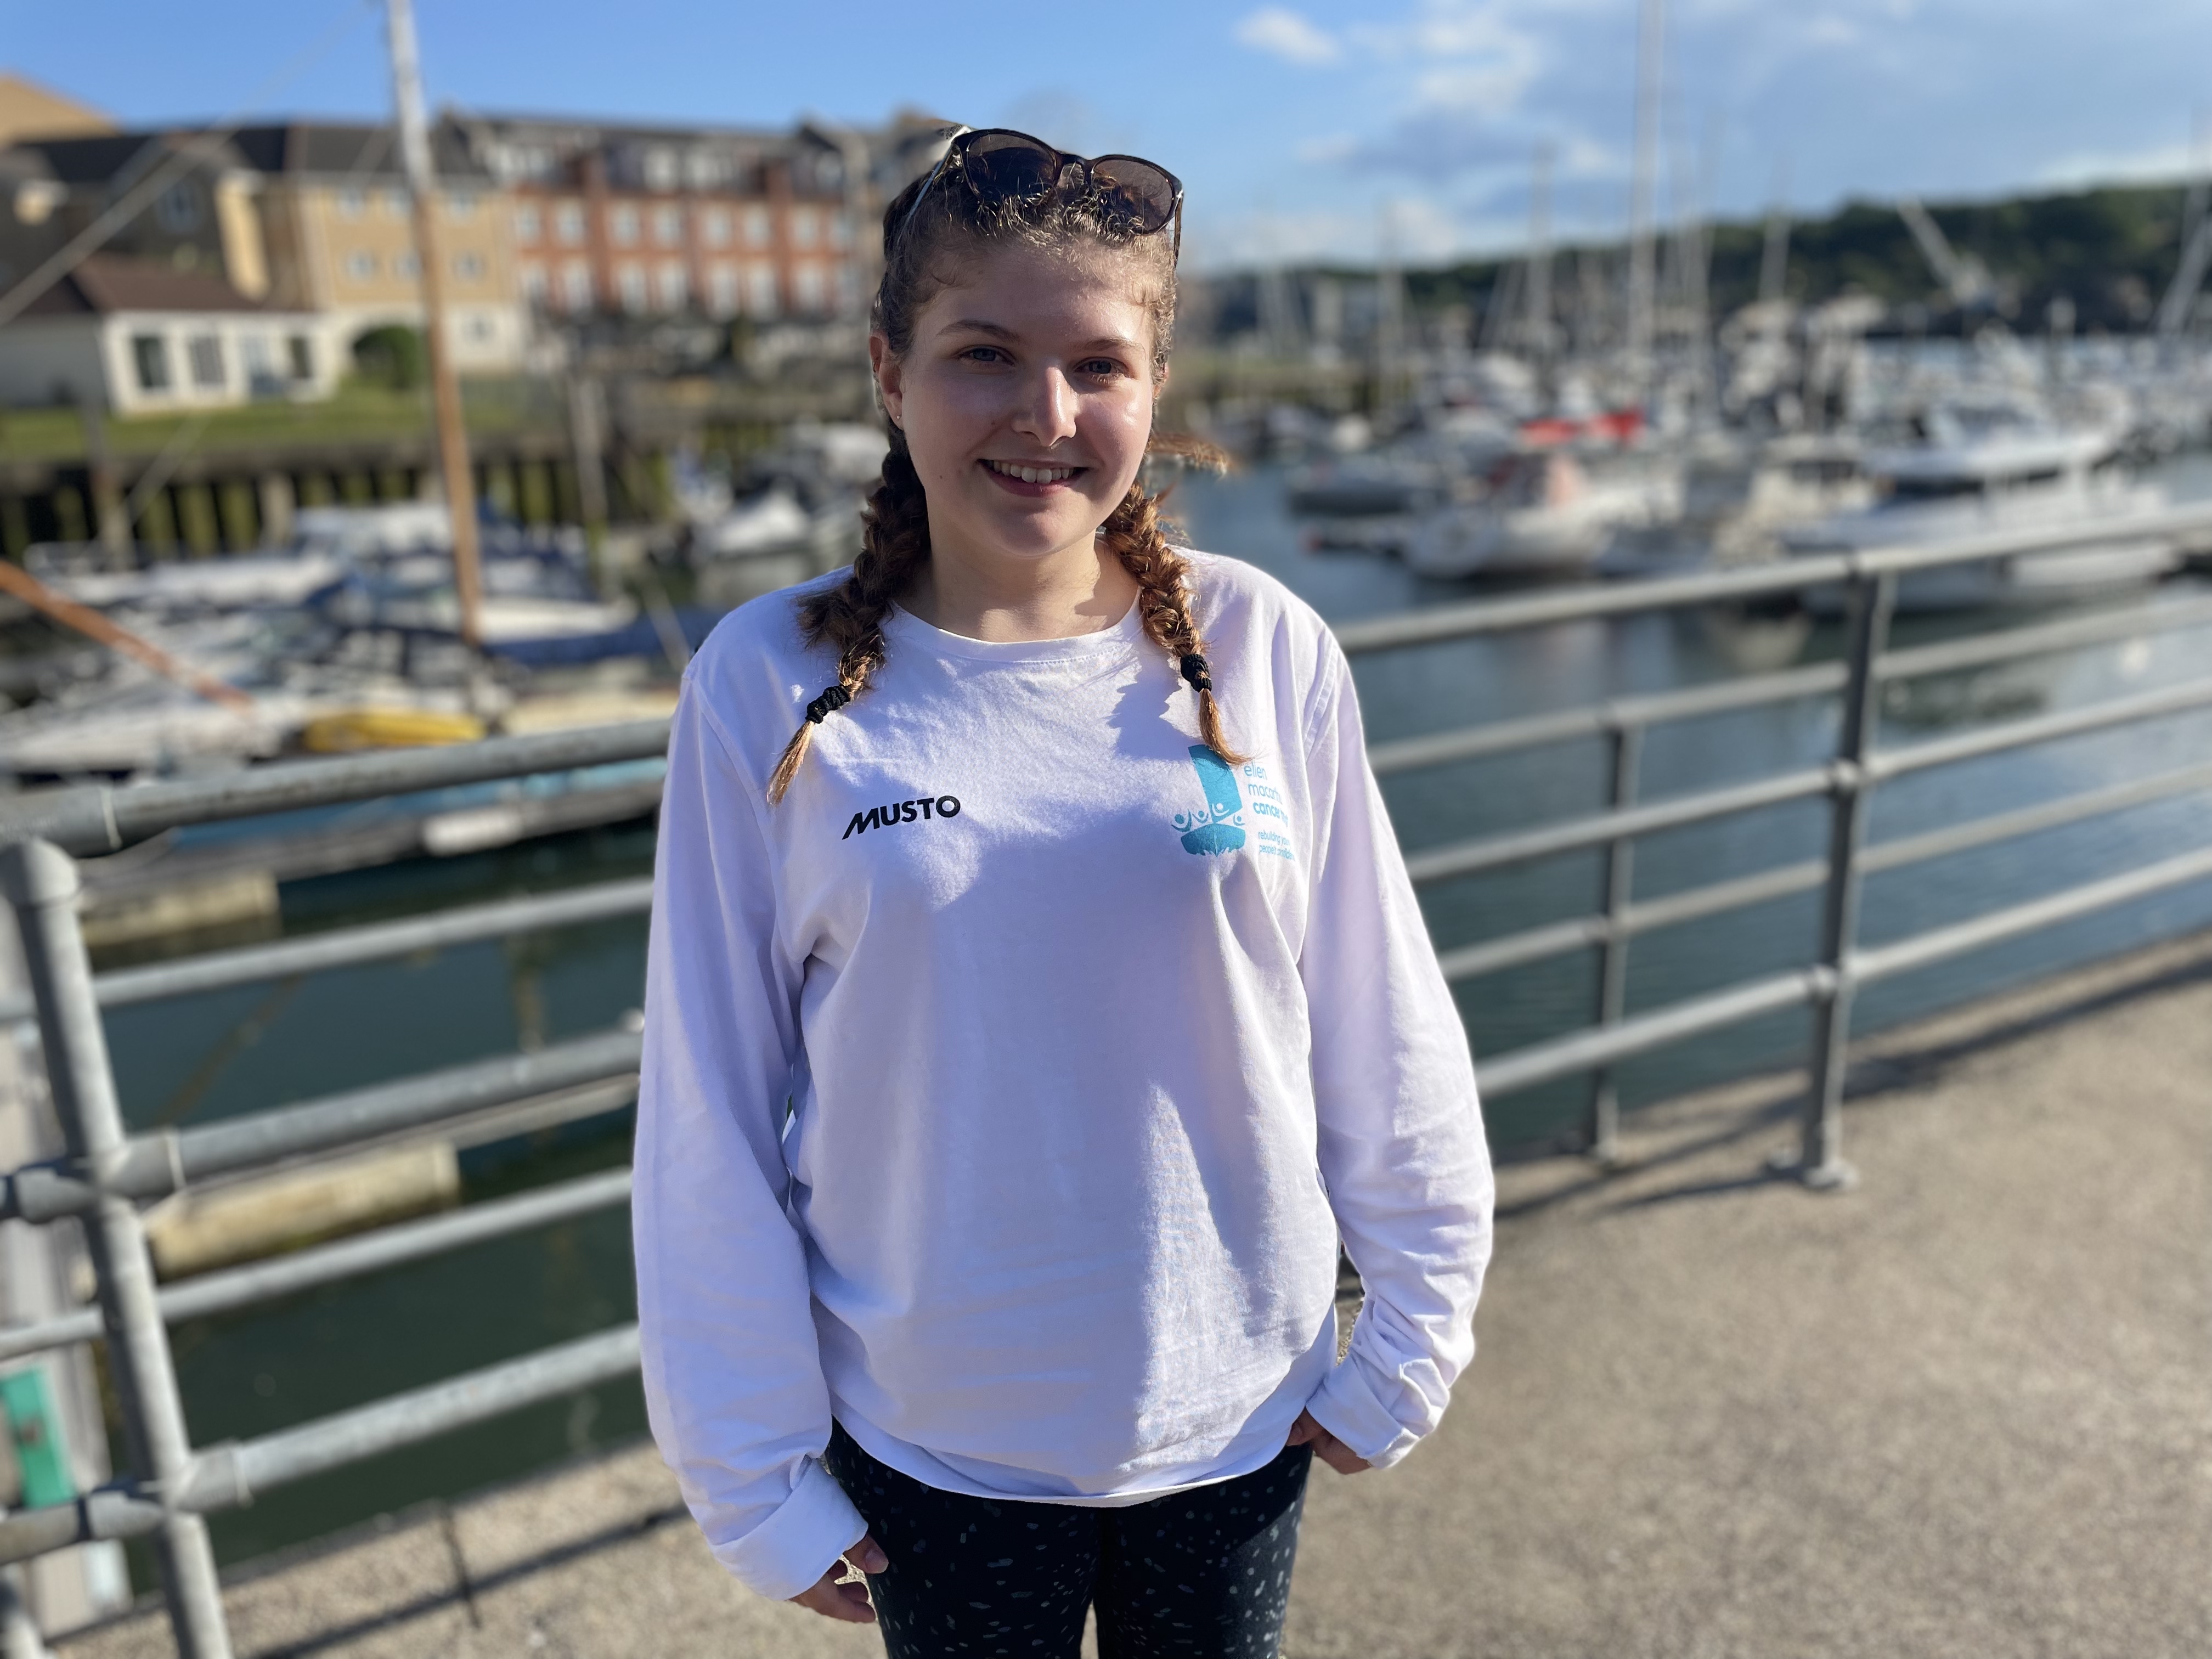 Libby standing smiling in front of East Cowes Marina on a sunny day on the Isle of Wight